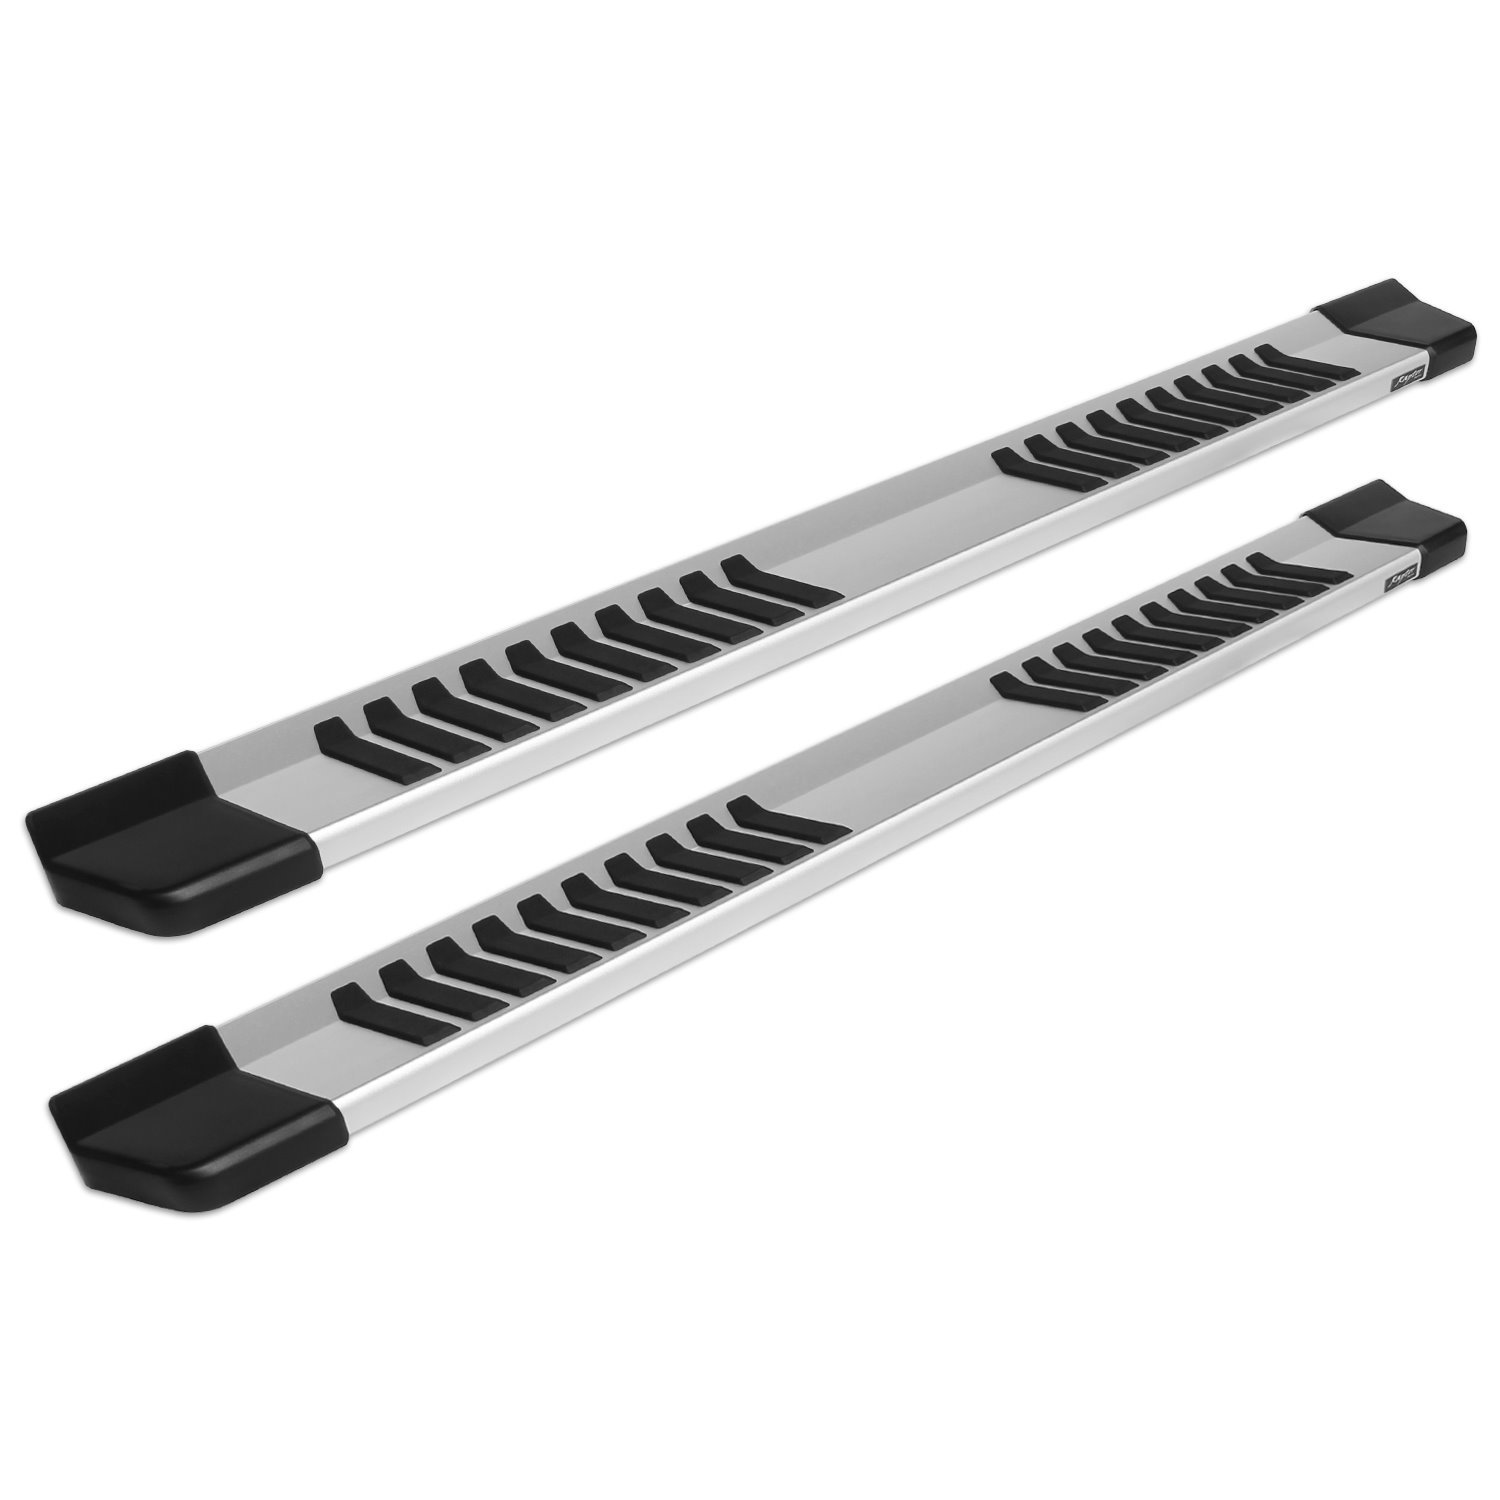 1702-0602 6 in OEM Style Slide Track Running Boards, Brushed Aluminum, Fits Select Dodge Ram 1500 New Body Style Crew Cab